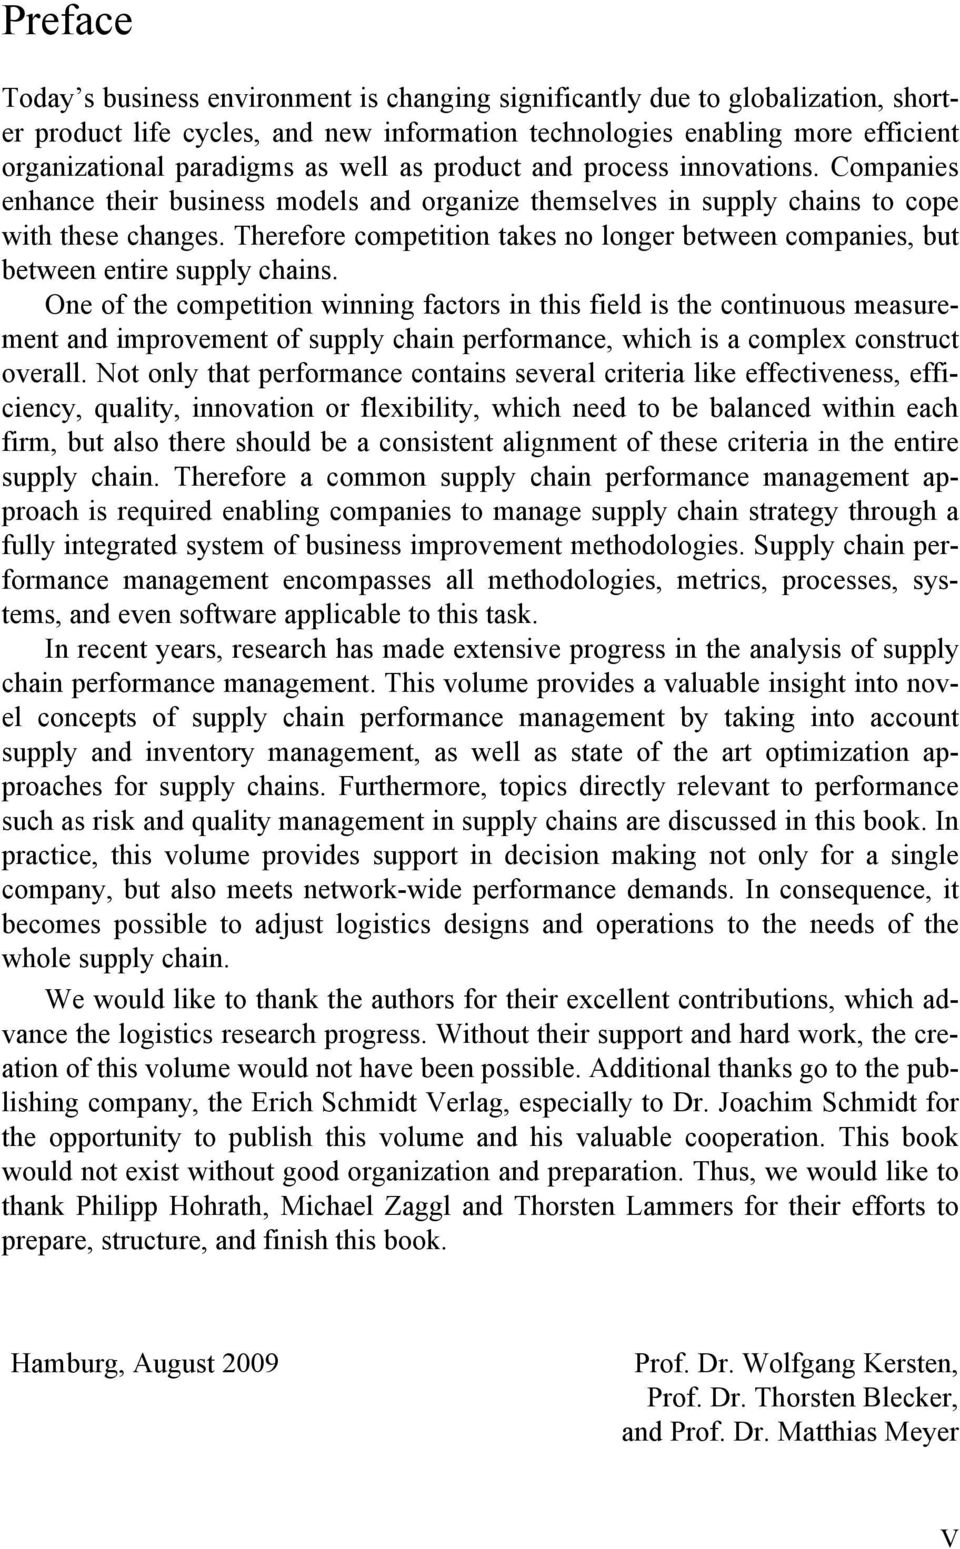 Therefore competition takes no longer between companies, but between entire supply chains.